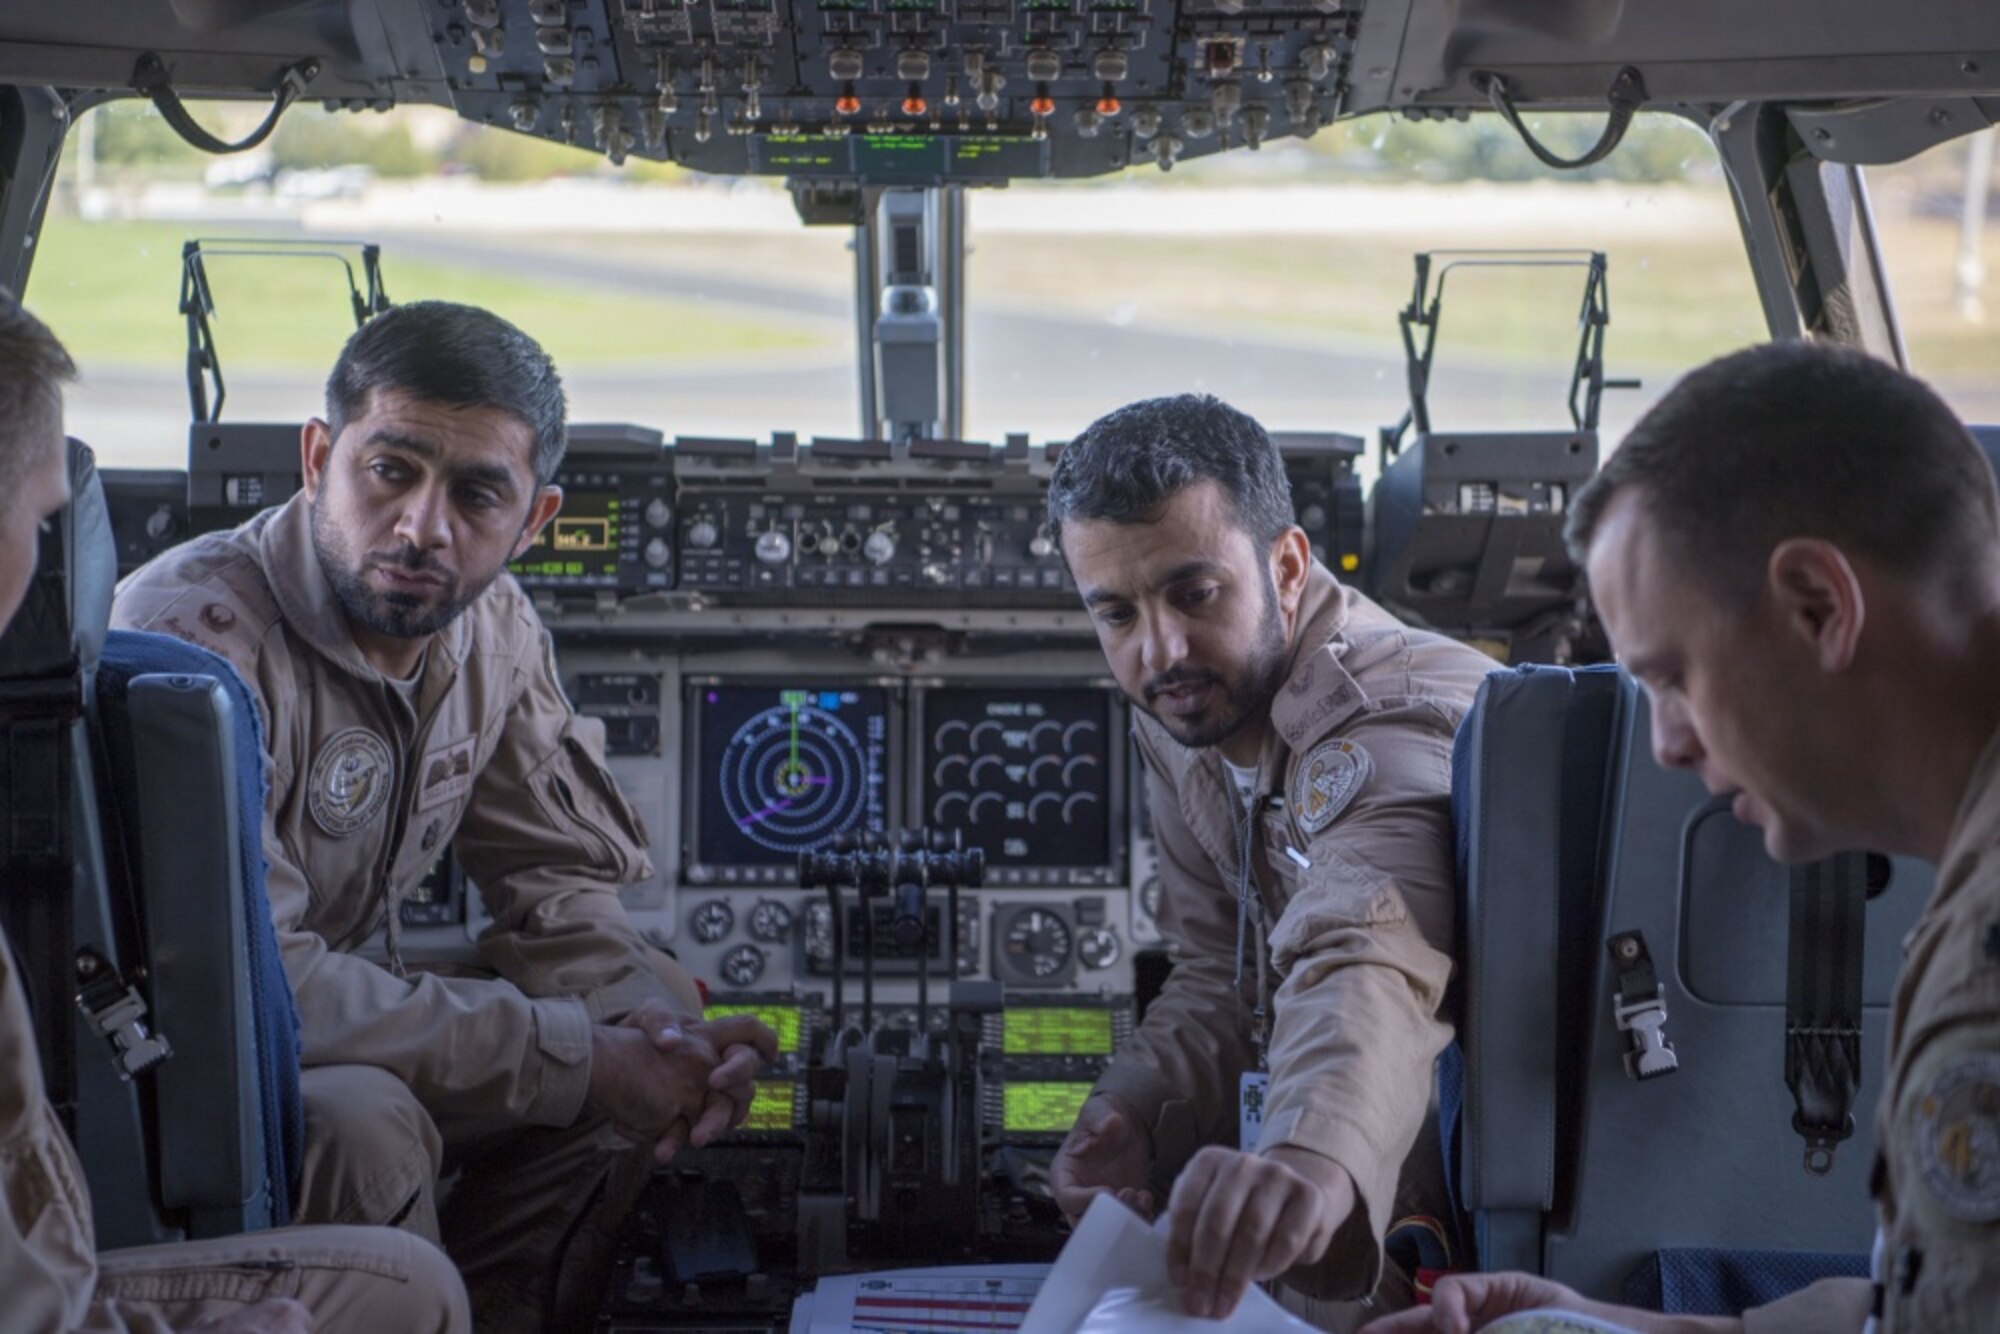 Members of a United Arab Emirates Air Force C-17A Globemaster III, discuss flight plans in preparation for their first conventional airdrop training mission, Sept. 25, 2019, while news media personnel flew aboard during an exercise on Mobility Guardian 2019 media day, over Fairchild Air Force Base, Washington. Exercise Mobility Guardian is Air Mobility Command's premier, large scale mobility exercise. Through robust and relevant training, Mobility Guardian improves the readiness and capabilities of Mobility Airmen to deliver rapid global mobility and builds a more lethal and ready Air Force. (U.S. Air Force photo by Senior Airman Charles T. Fultz)